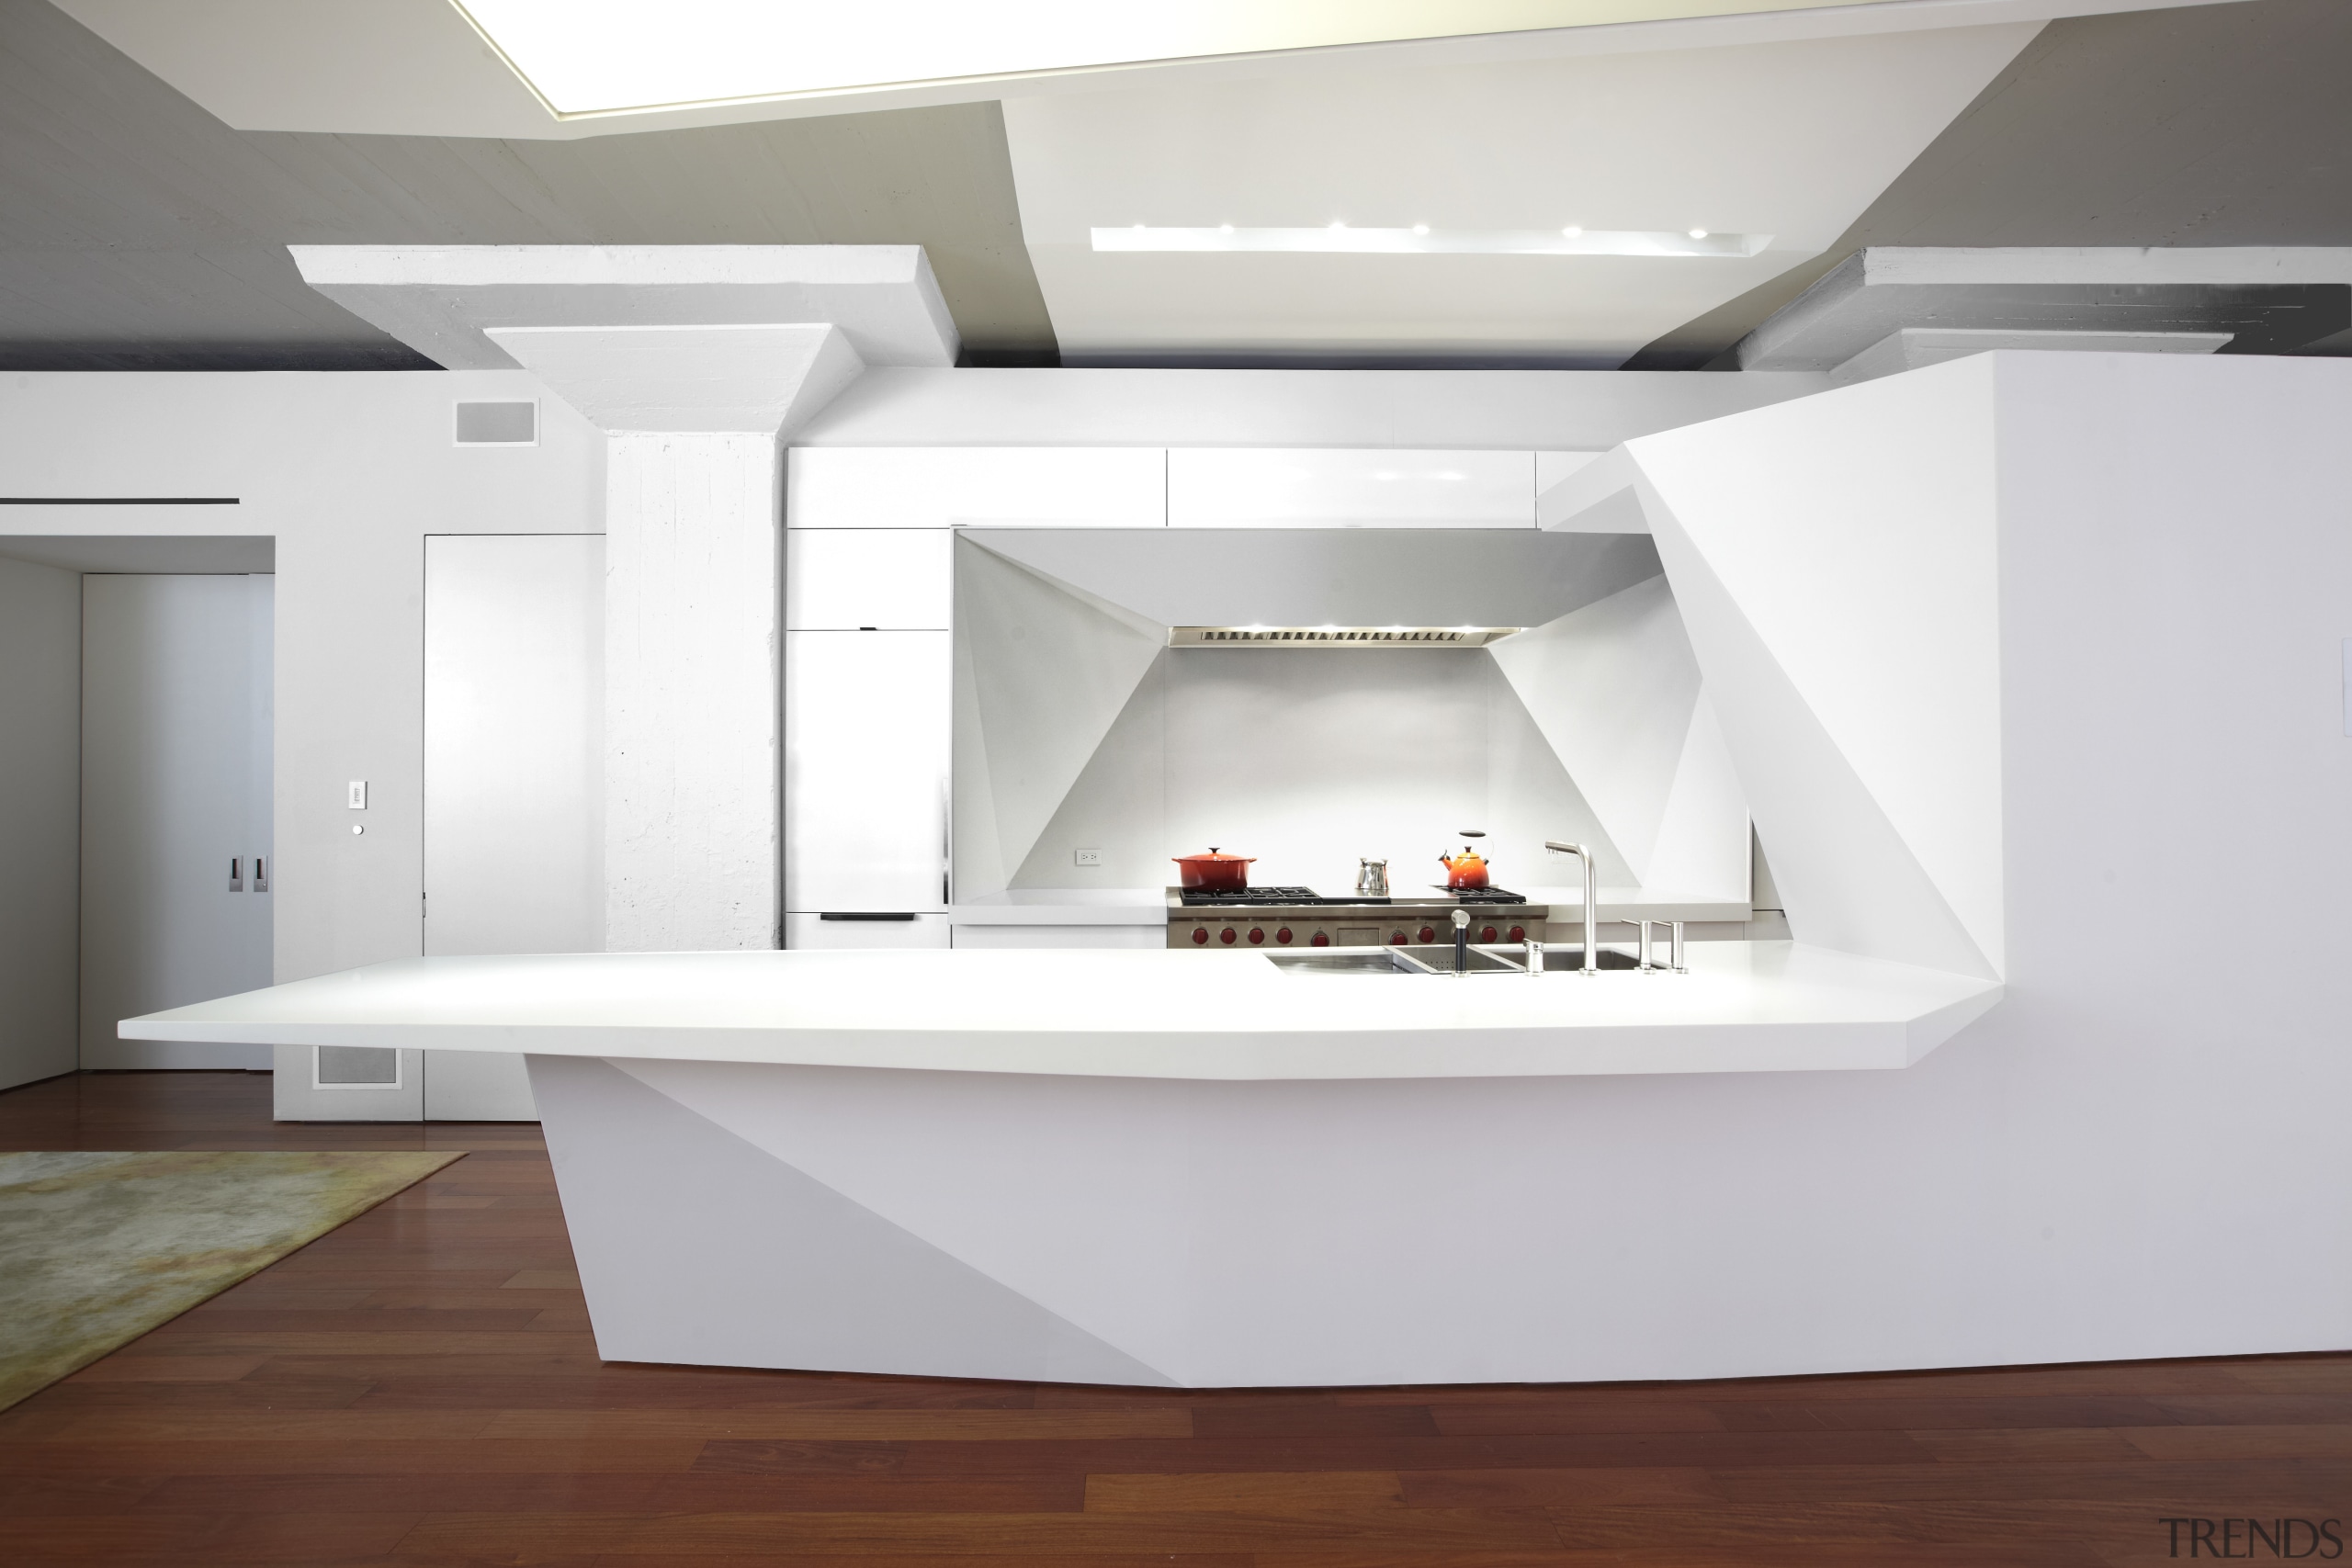 Here is a view of a kitchen designed architecture, countertop, furniture, interior design, product design, table, white, gray